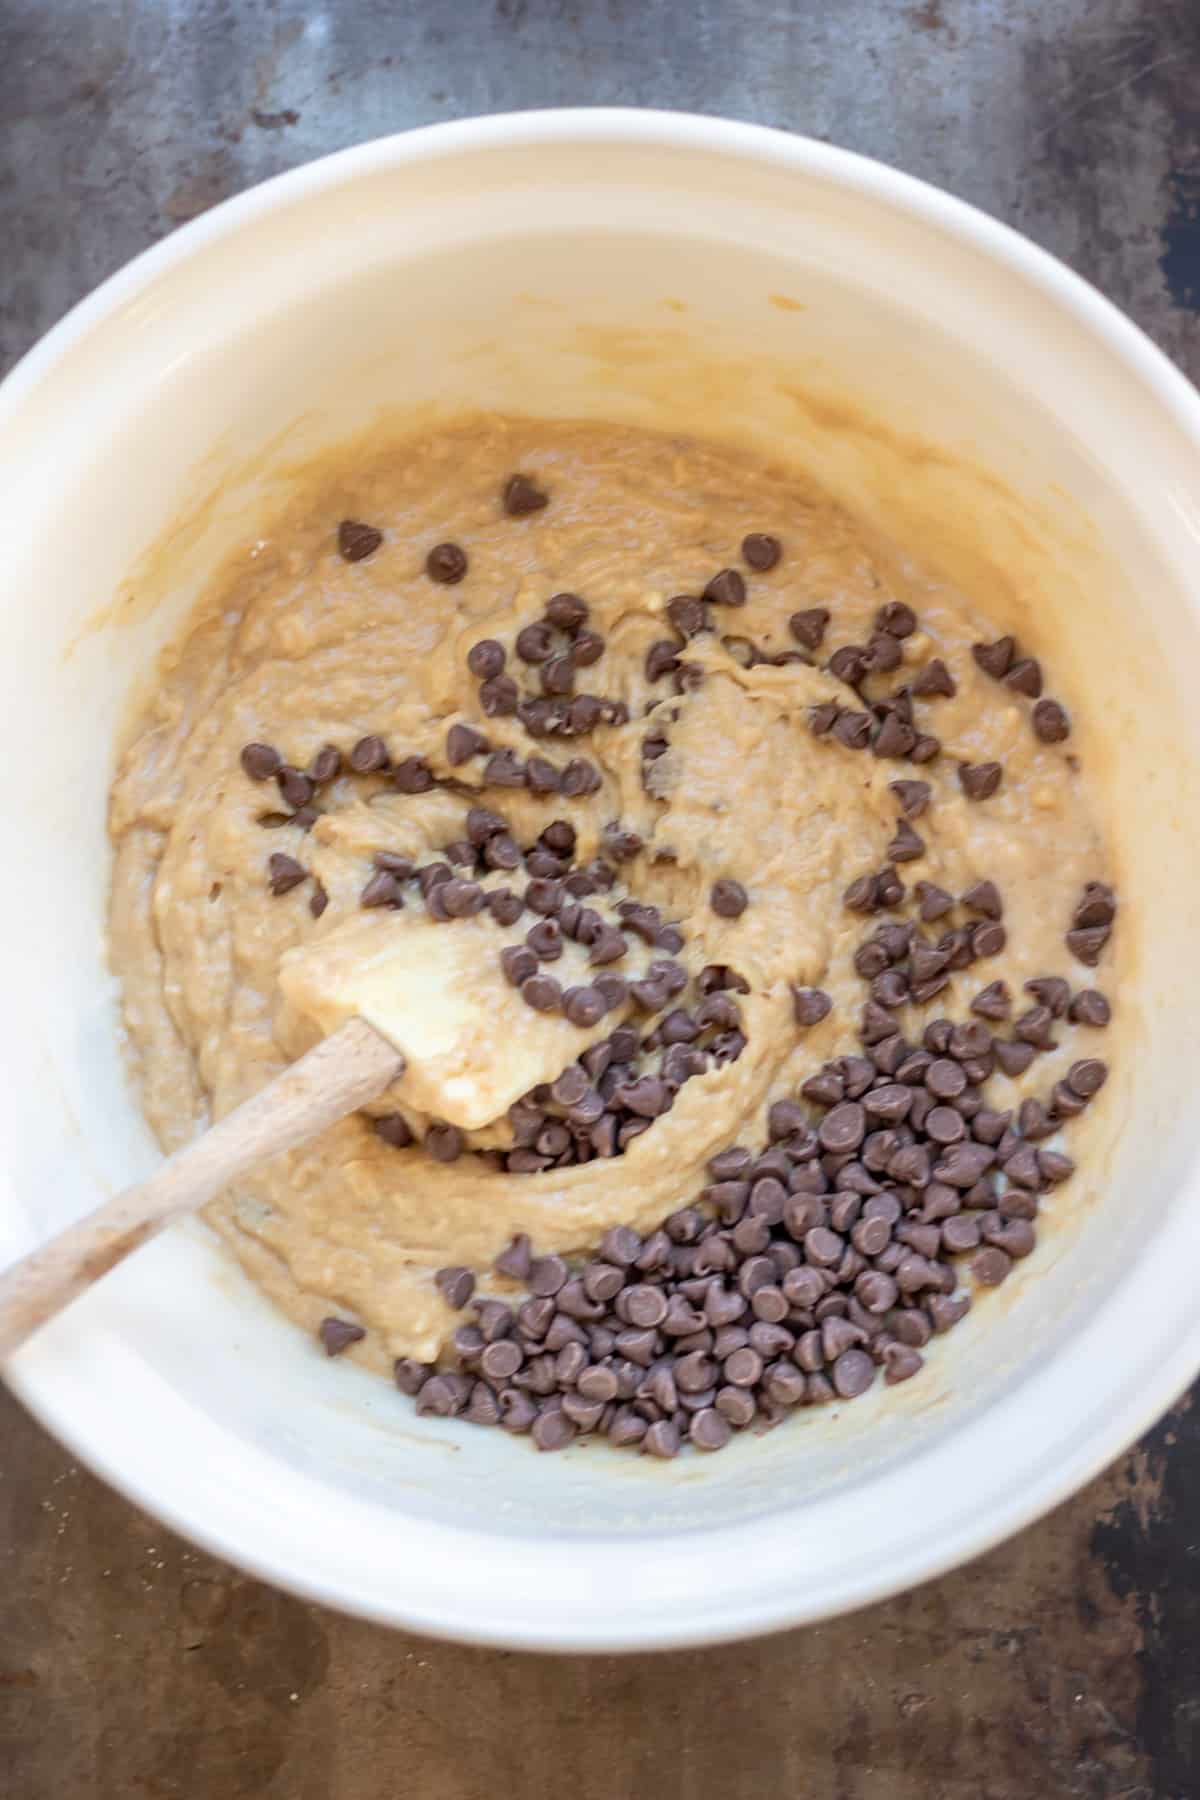 Stirring in the chocolate chips.